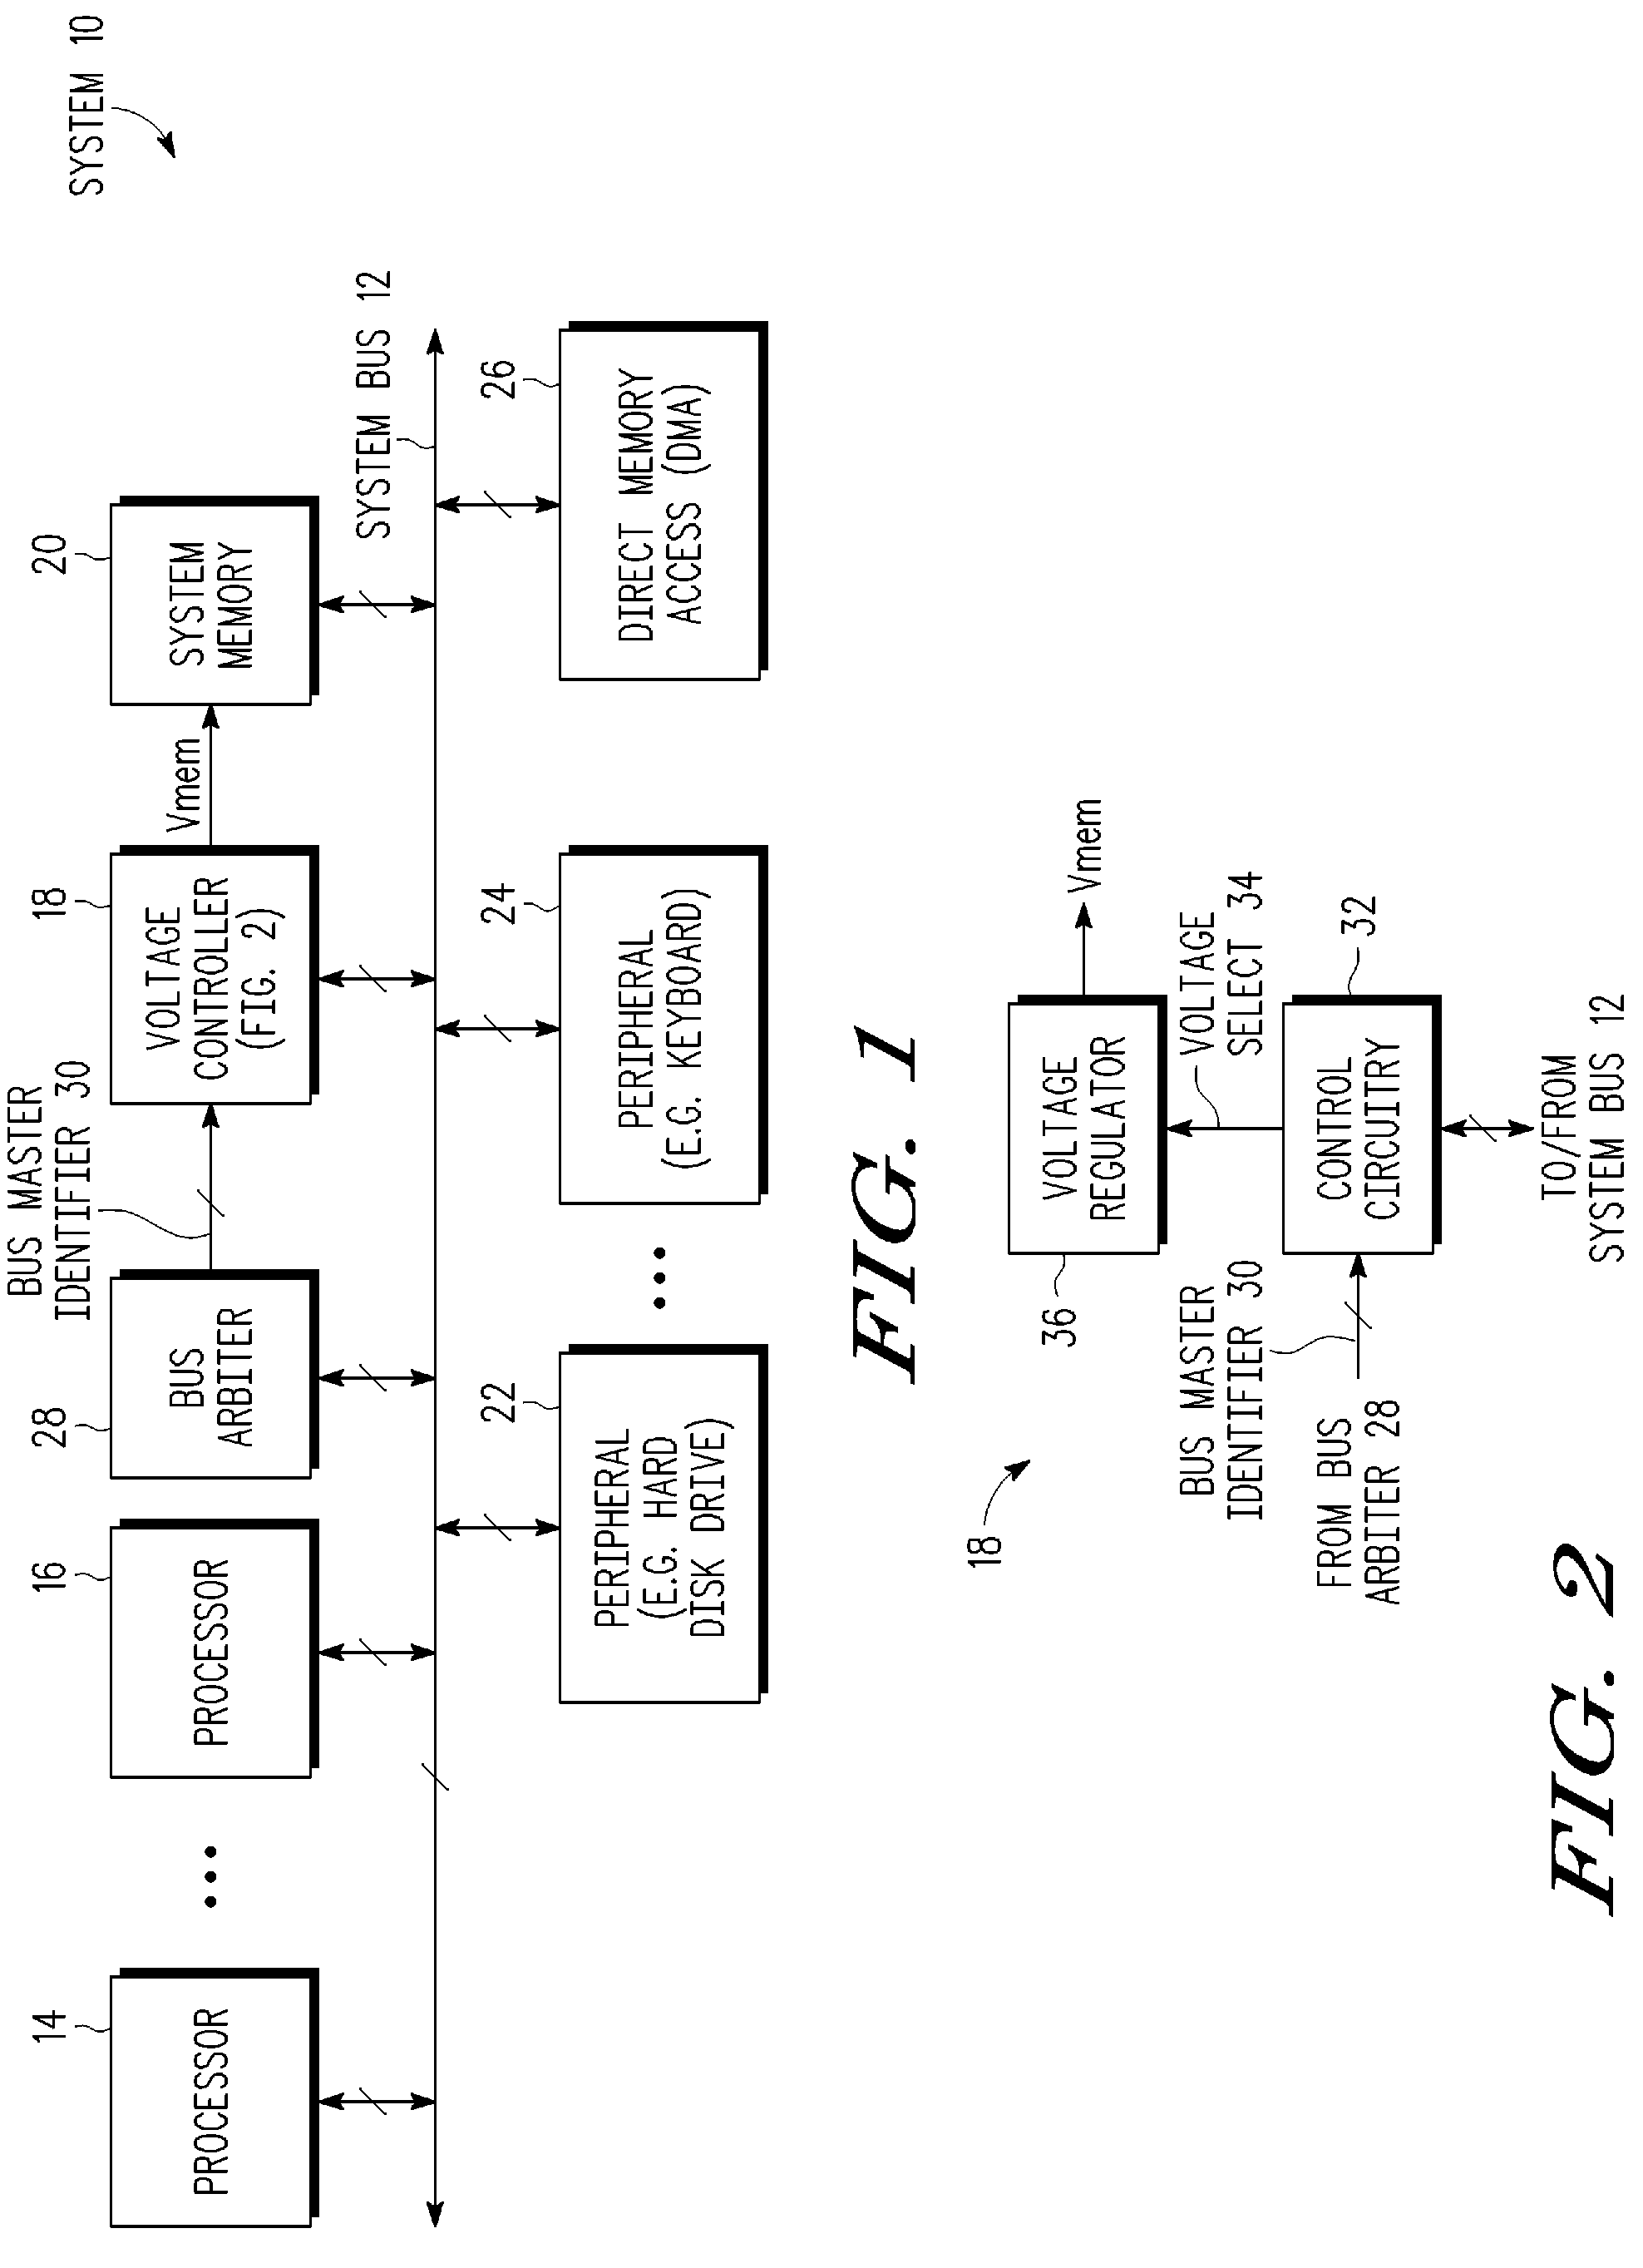 System having a memory voltage controller and method therefor